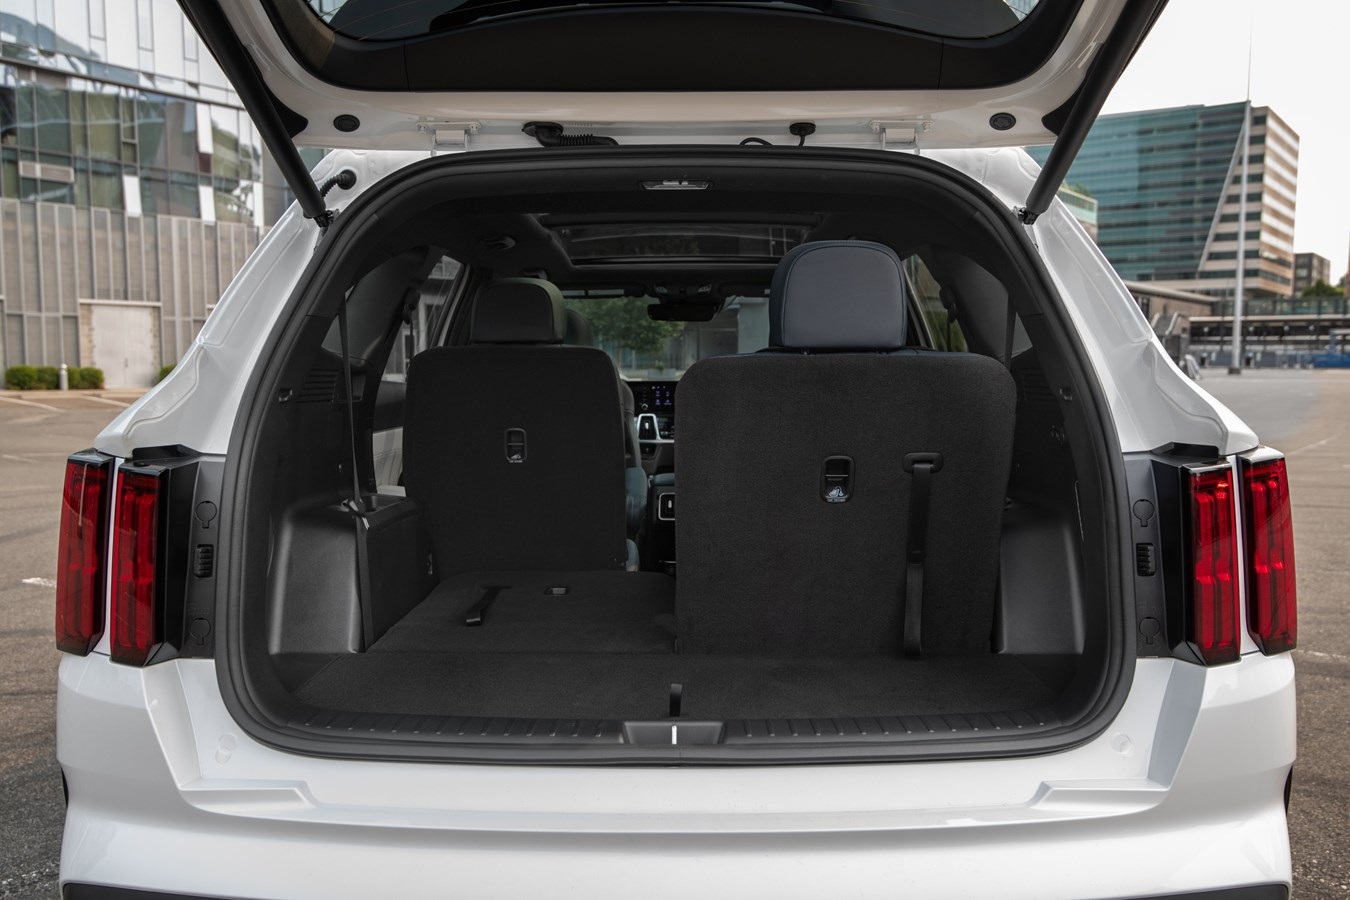 The Sorento’s third row that folds flat to the floor.